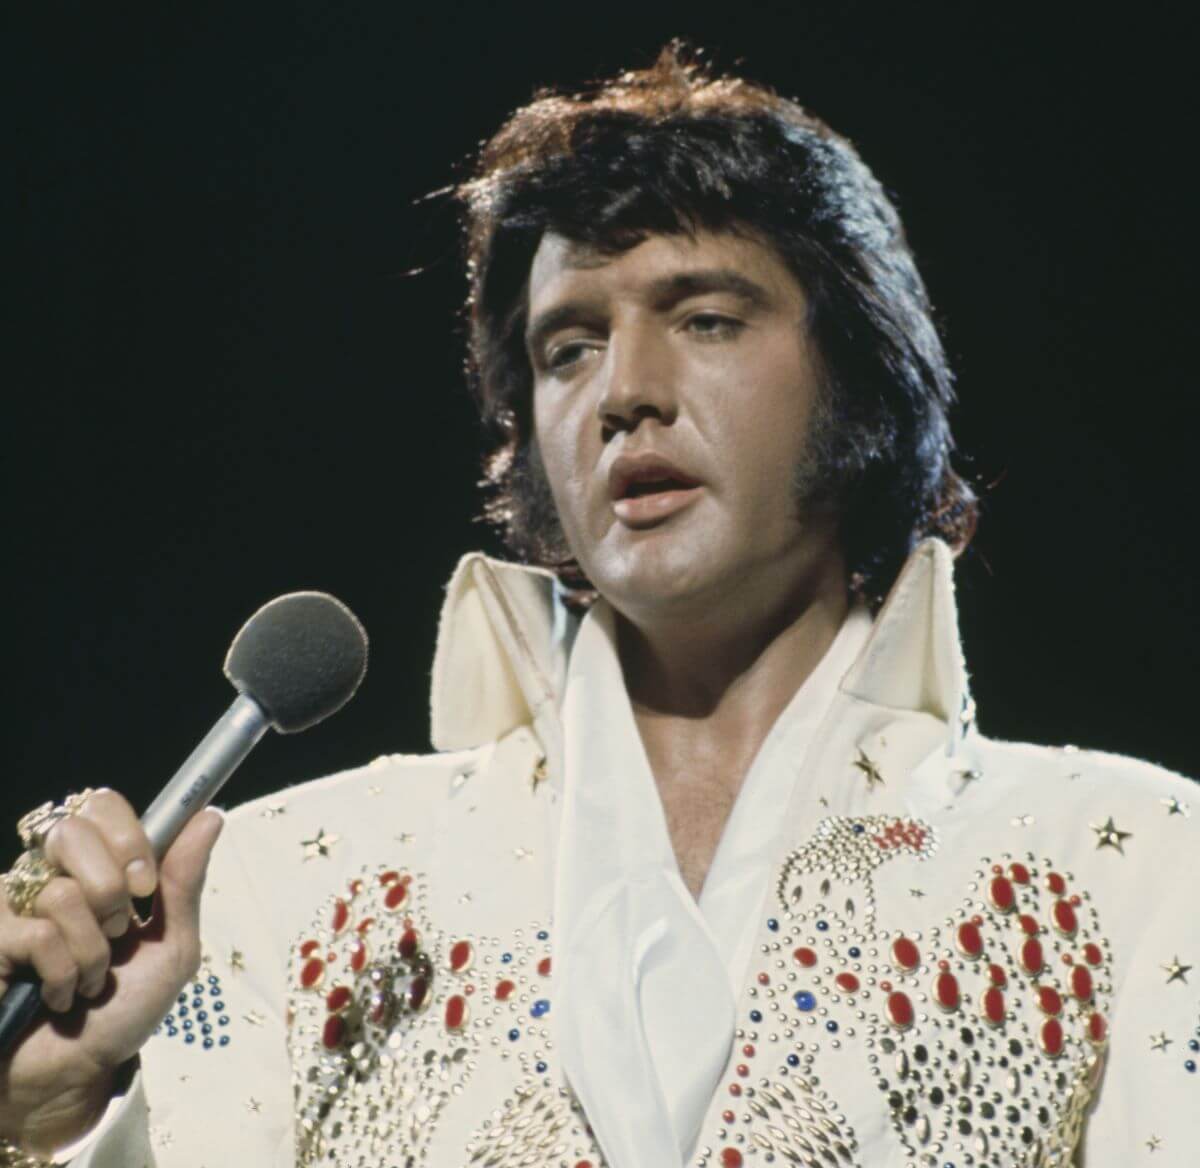 Elvis wears a white jumpsuit and holds a microphone.